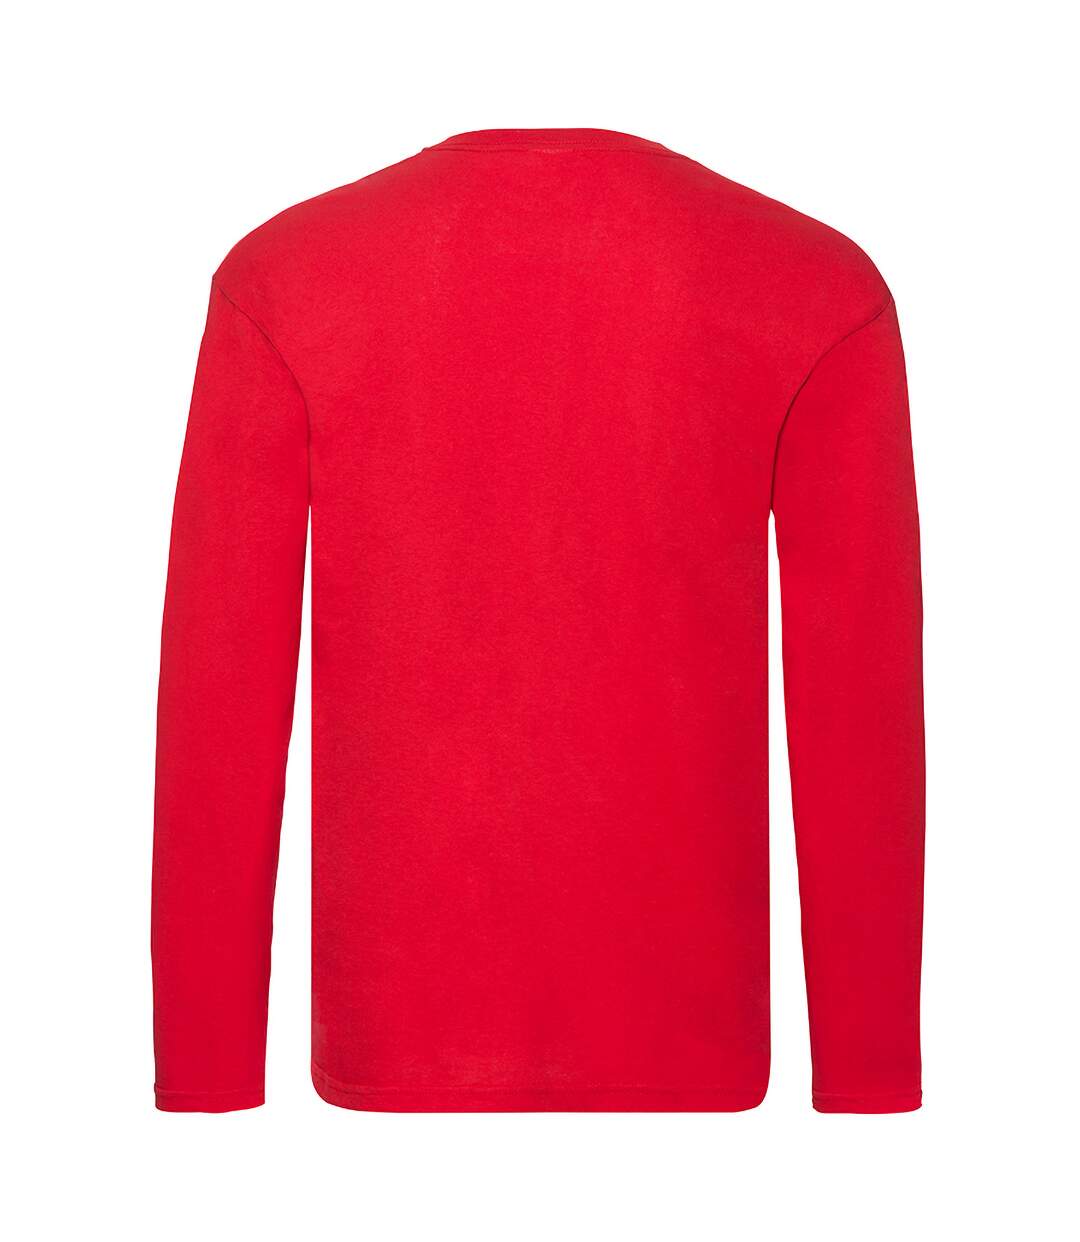 Fruit Of The Loom - T-shirt manches longues ORIGINAL - Homme (Rouge) - UTPC3035